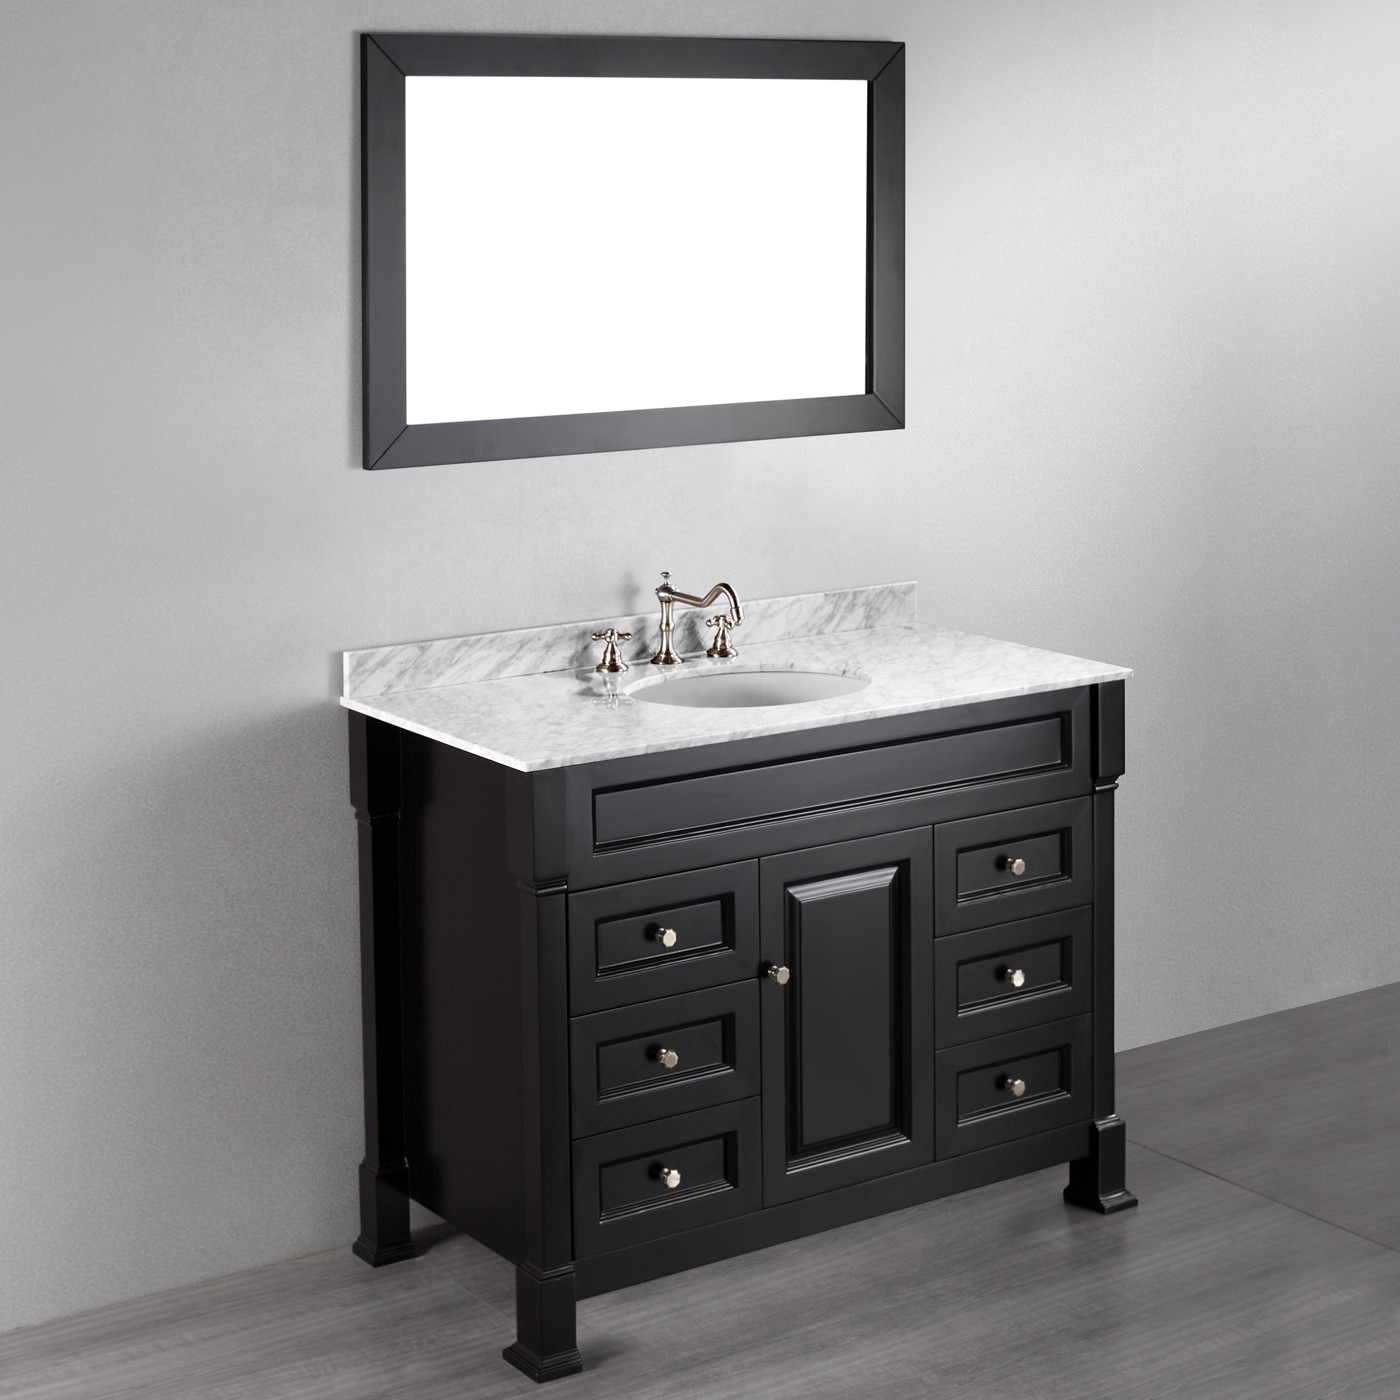 Best ideas about Bathroom Vanity With Top
. Save or Pin Bosconi SB 278 43 in Contemporary Single Sink Bathroom Now.